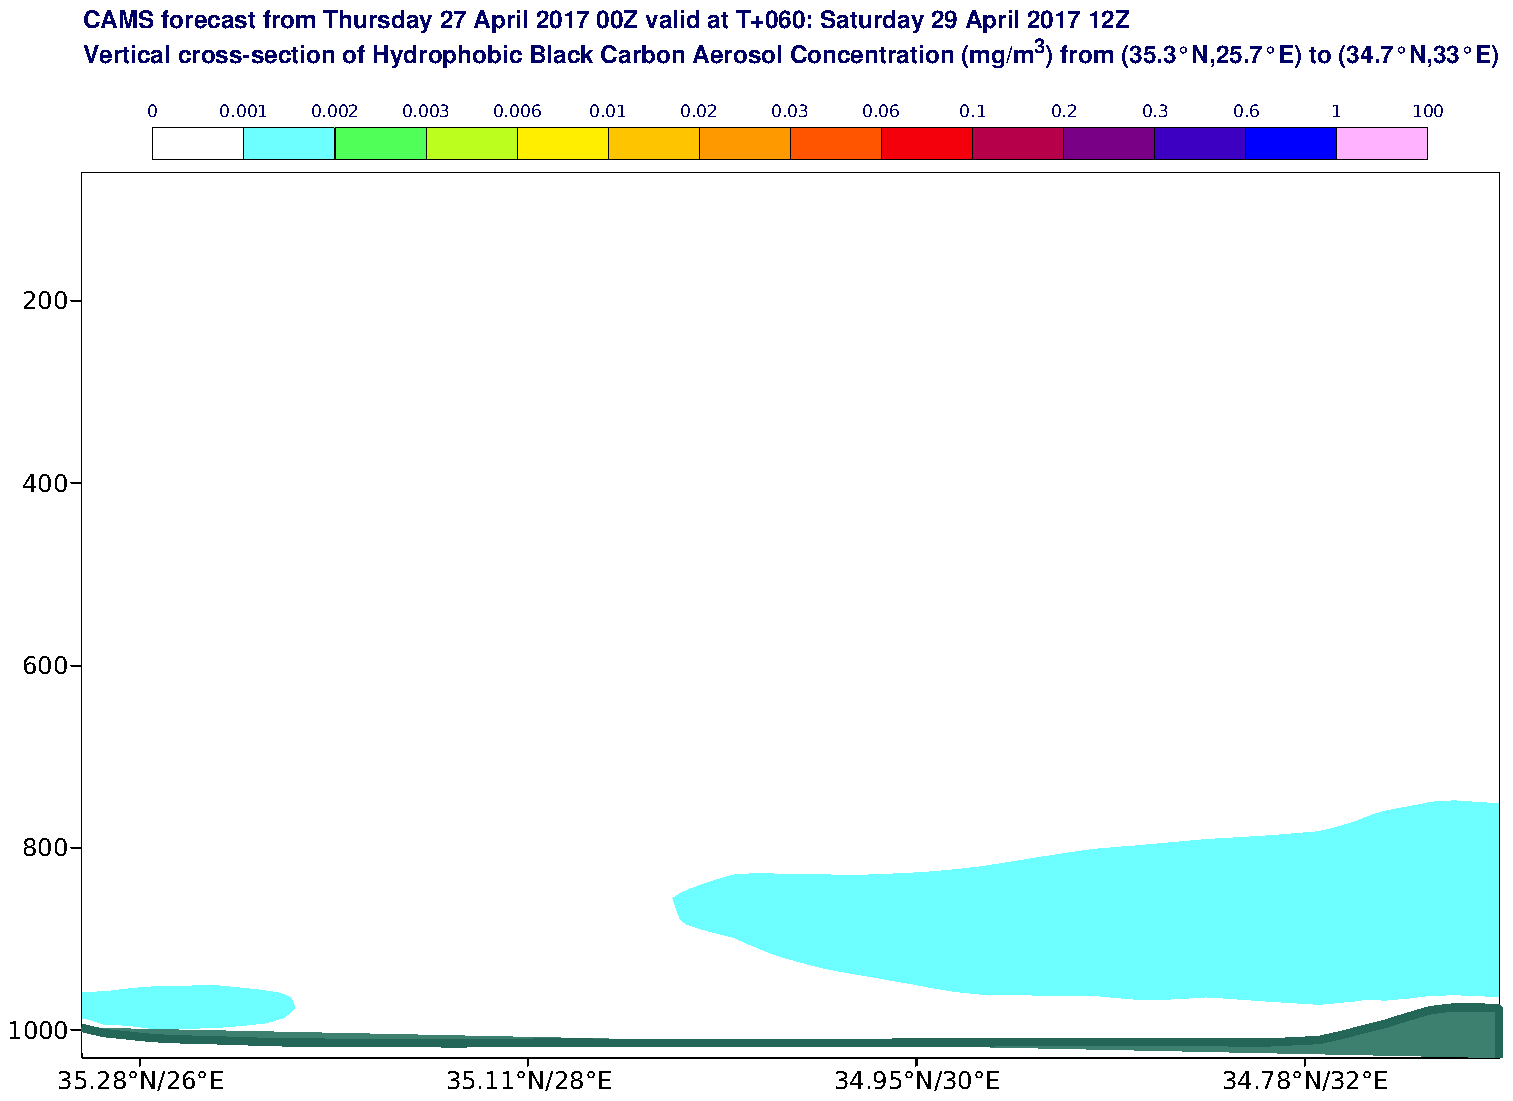 Vertical cross-section of Hydrophobic Black Carbon Aerosol Concentration (mg/m3) valid at T60 - 2017-04-29 12:00